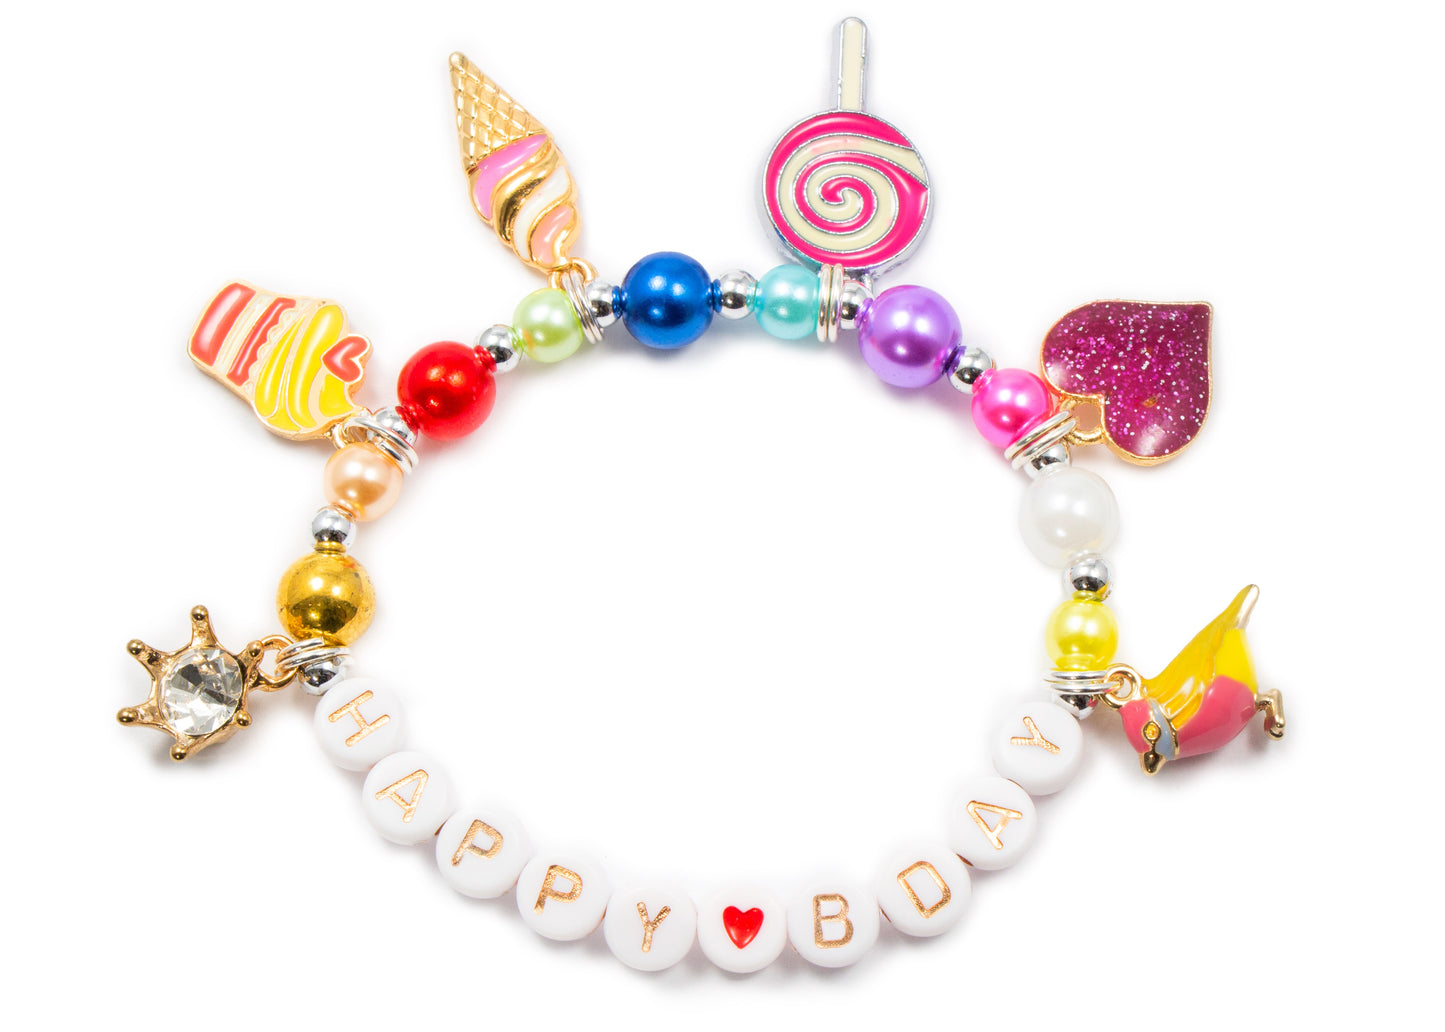 Girls birthday gift 3 4 5 6 7 8 9 10 years sweet candy charm bracelet personalized